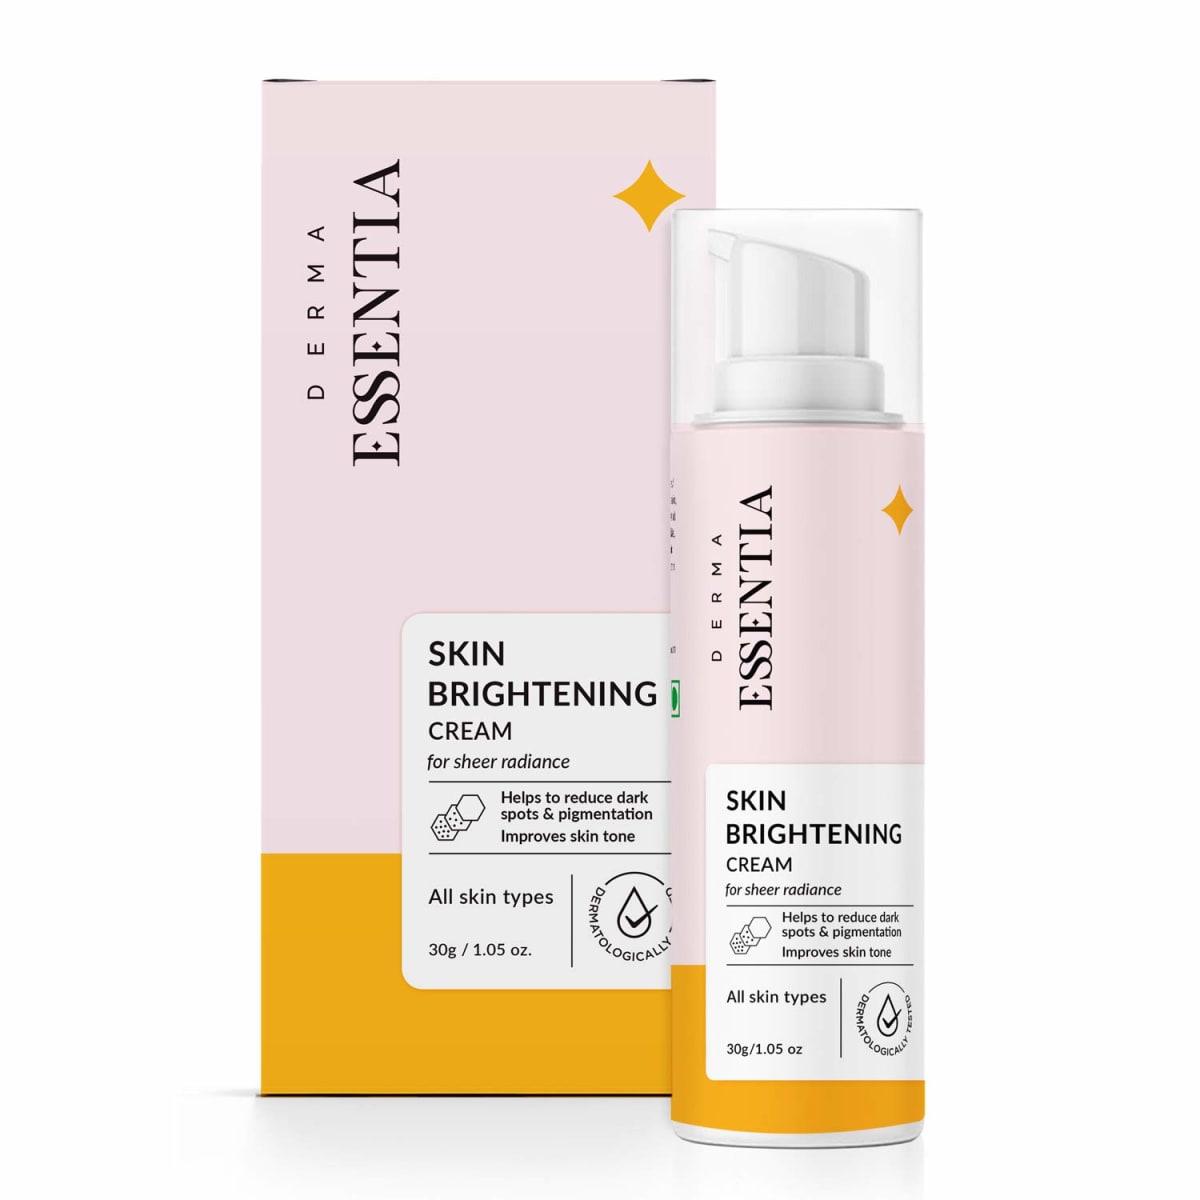 Derma Essentia Skin Brightening Face Cream 30gm for Reducing Dark Spots & Hyper Pigmentation & Age Spots & Melasma with Natural ingredients like Sabiwhite, Pterowhite and Belides for Anti-Oxidant and UV Protection | All Skin Types | No Harsh Chemicals